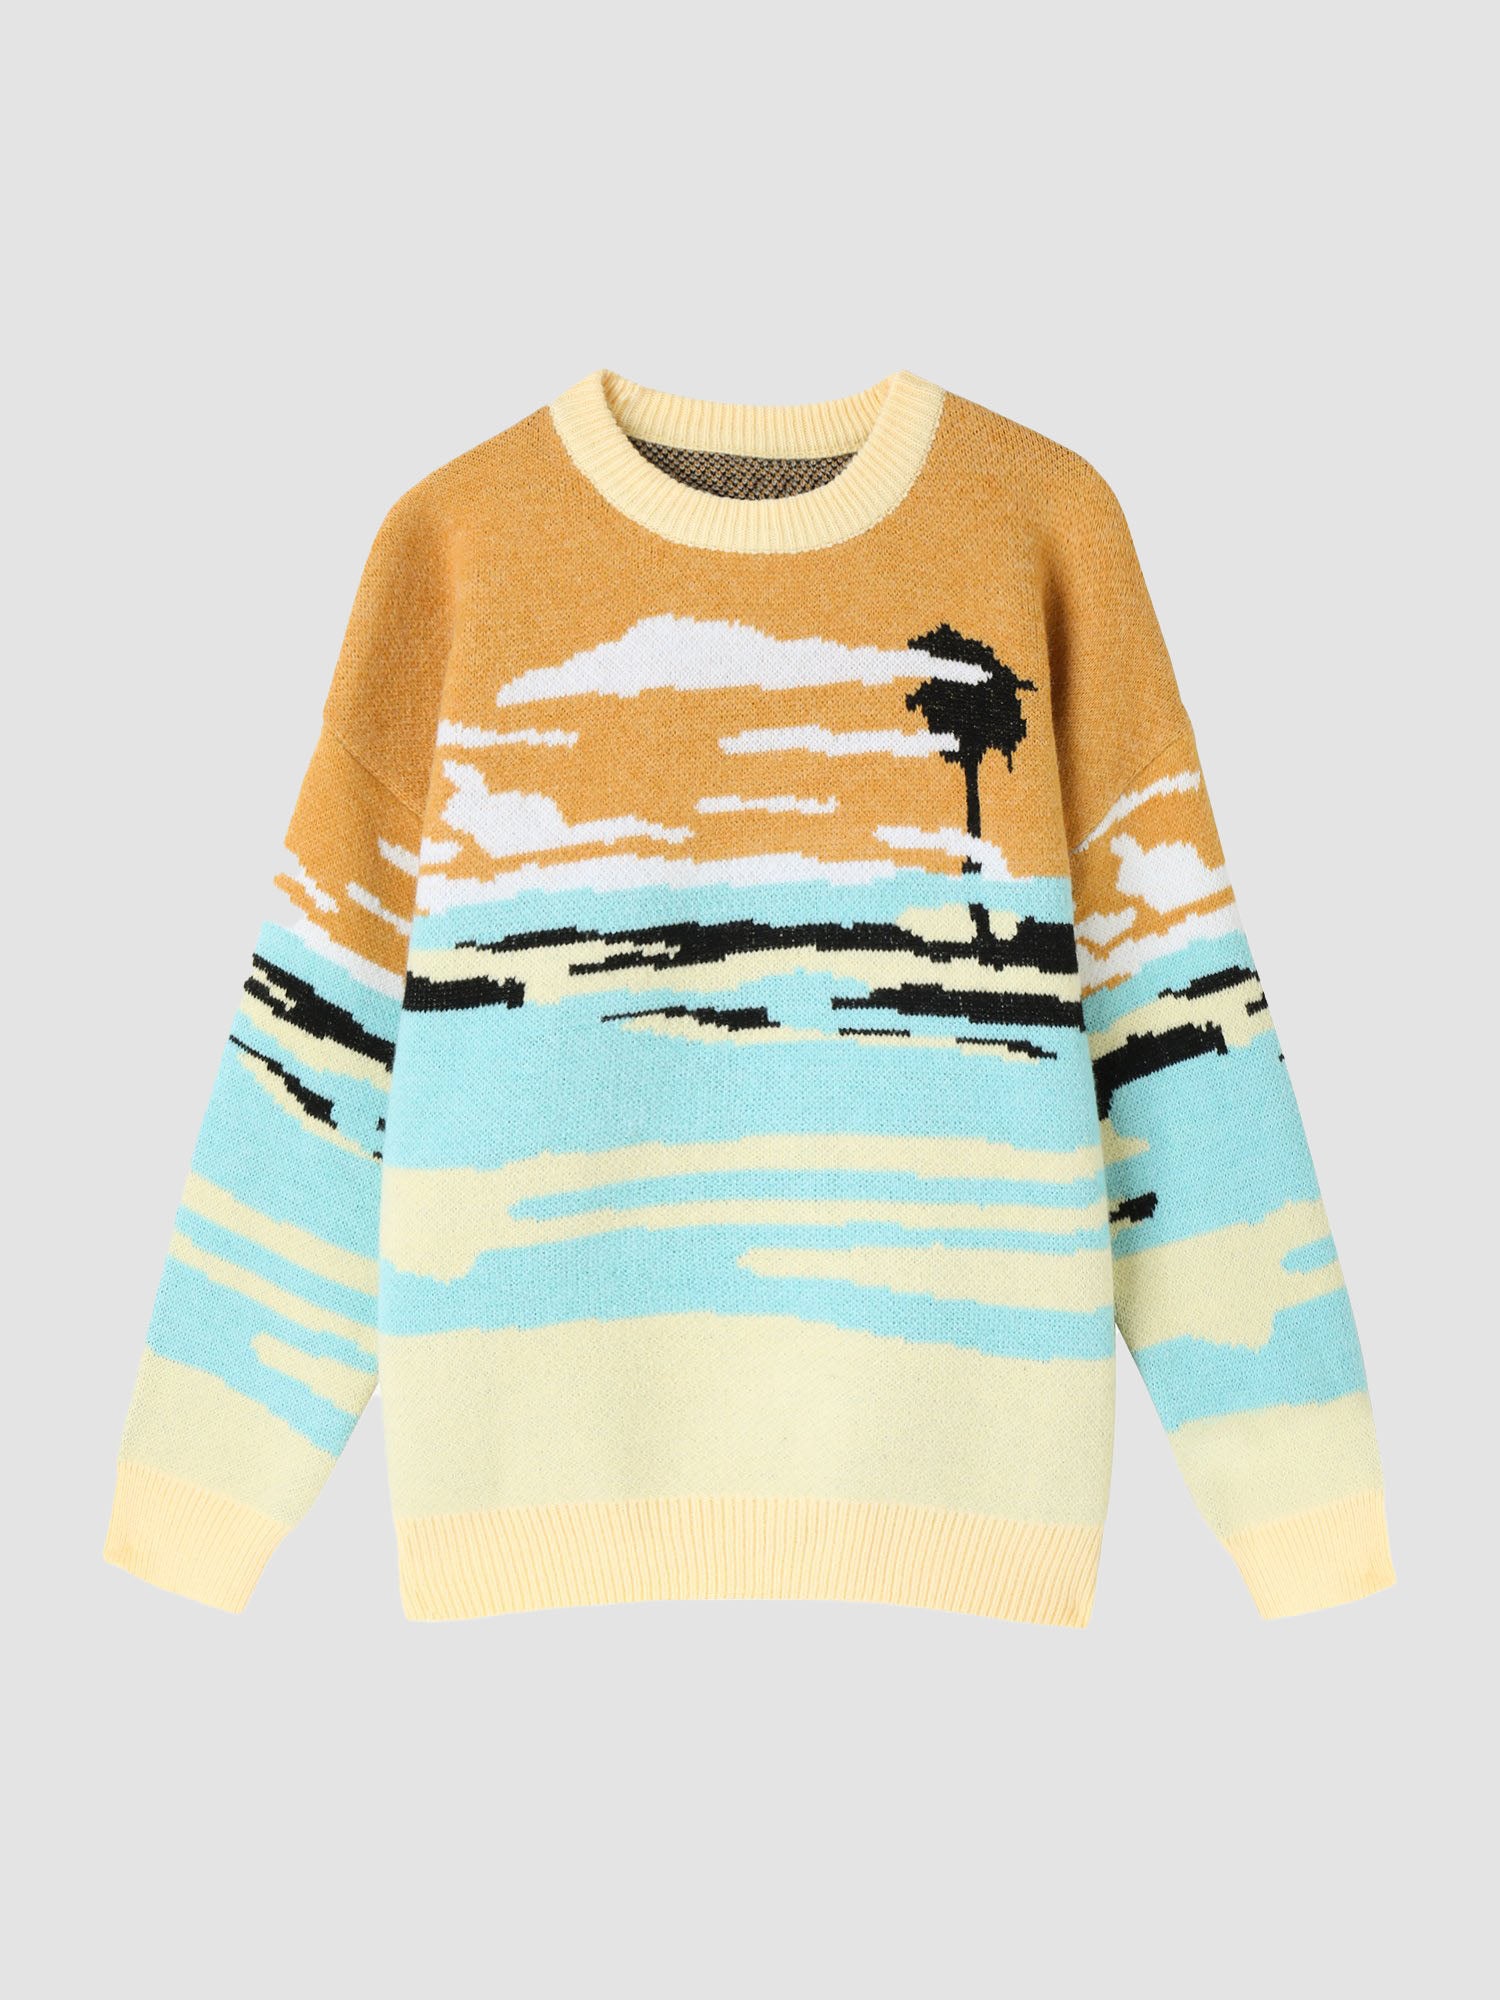 JUSTNOTAG Landscape Pattern Knitted Sweater